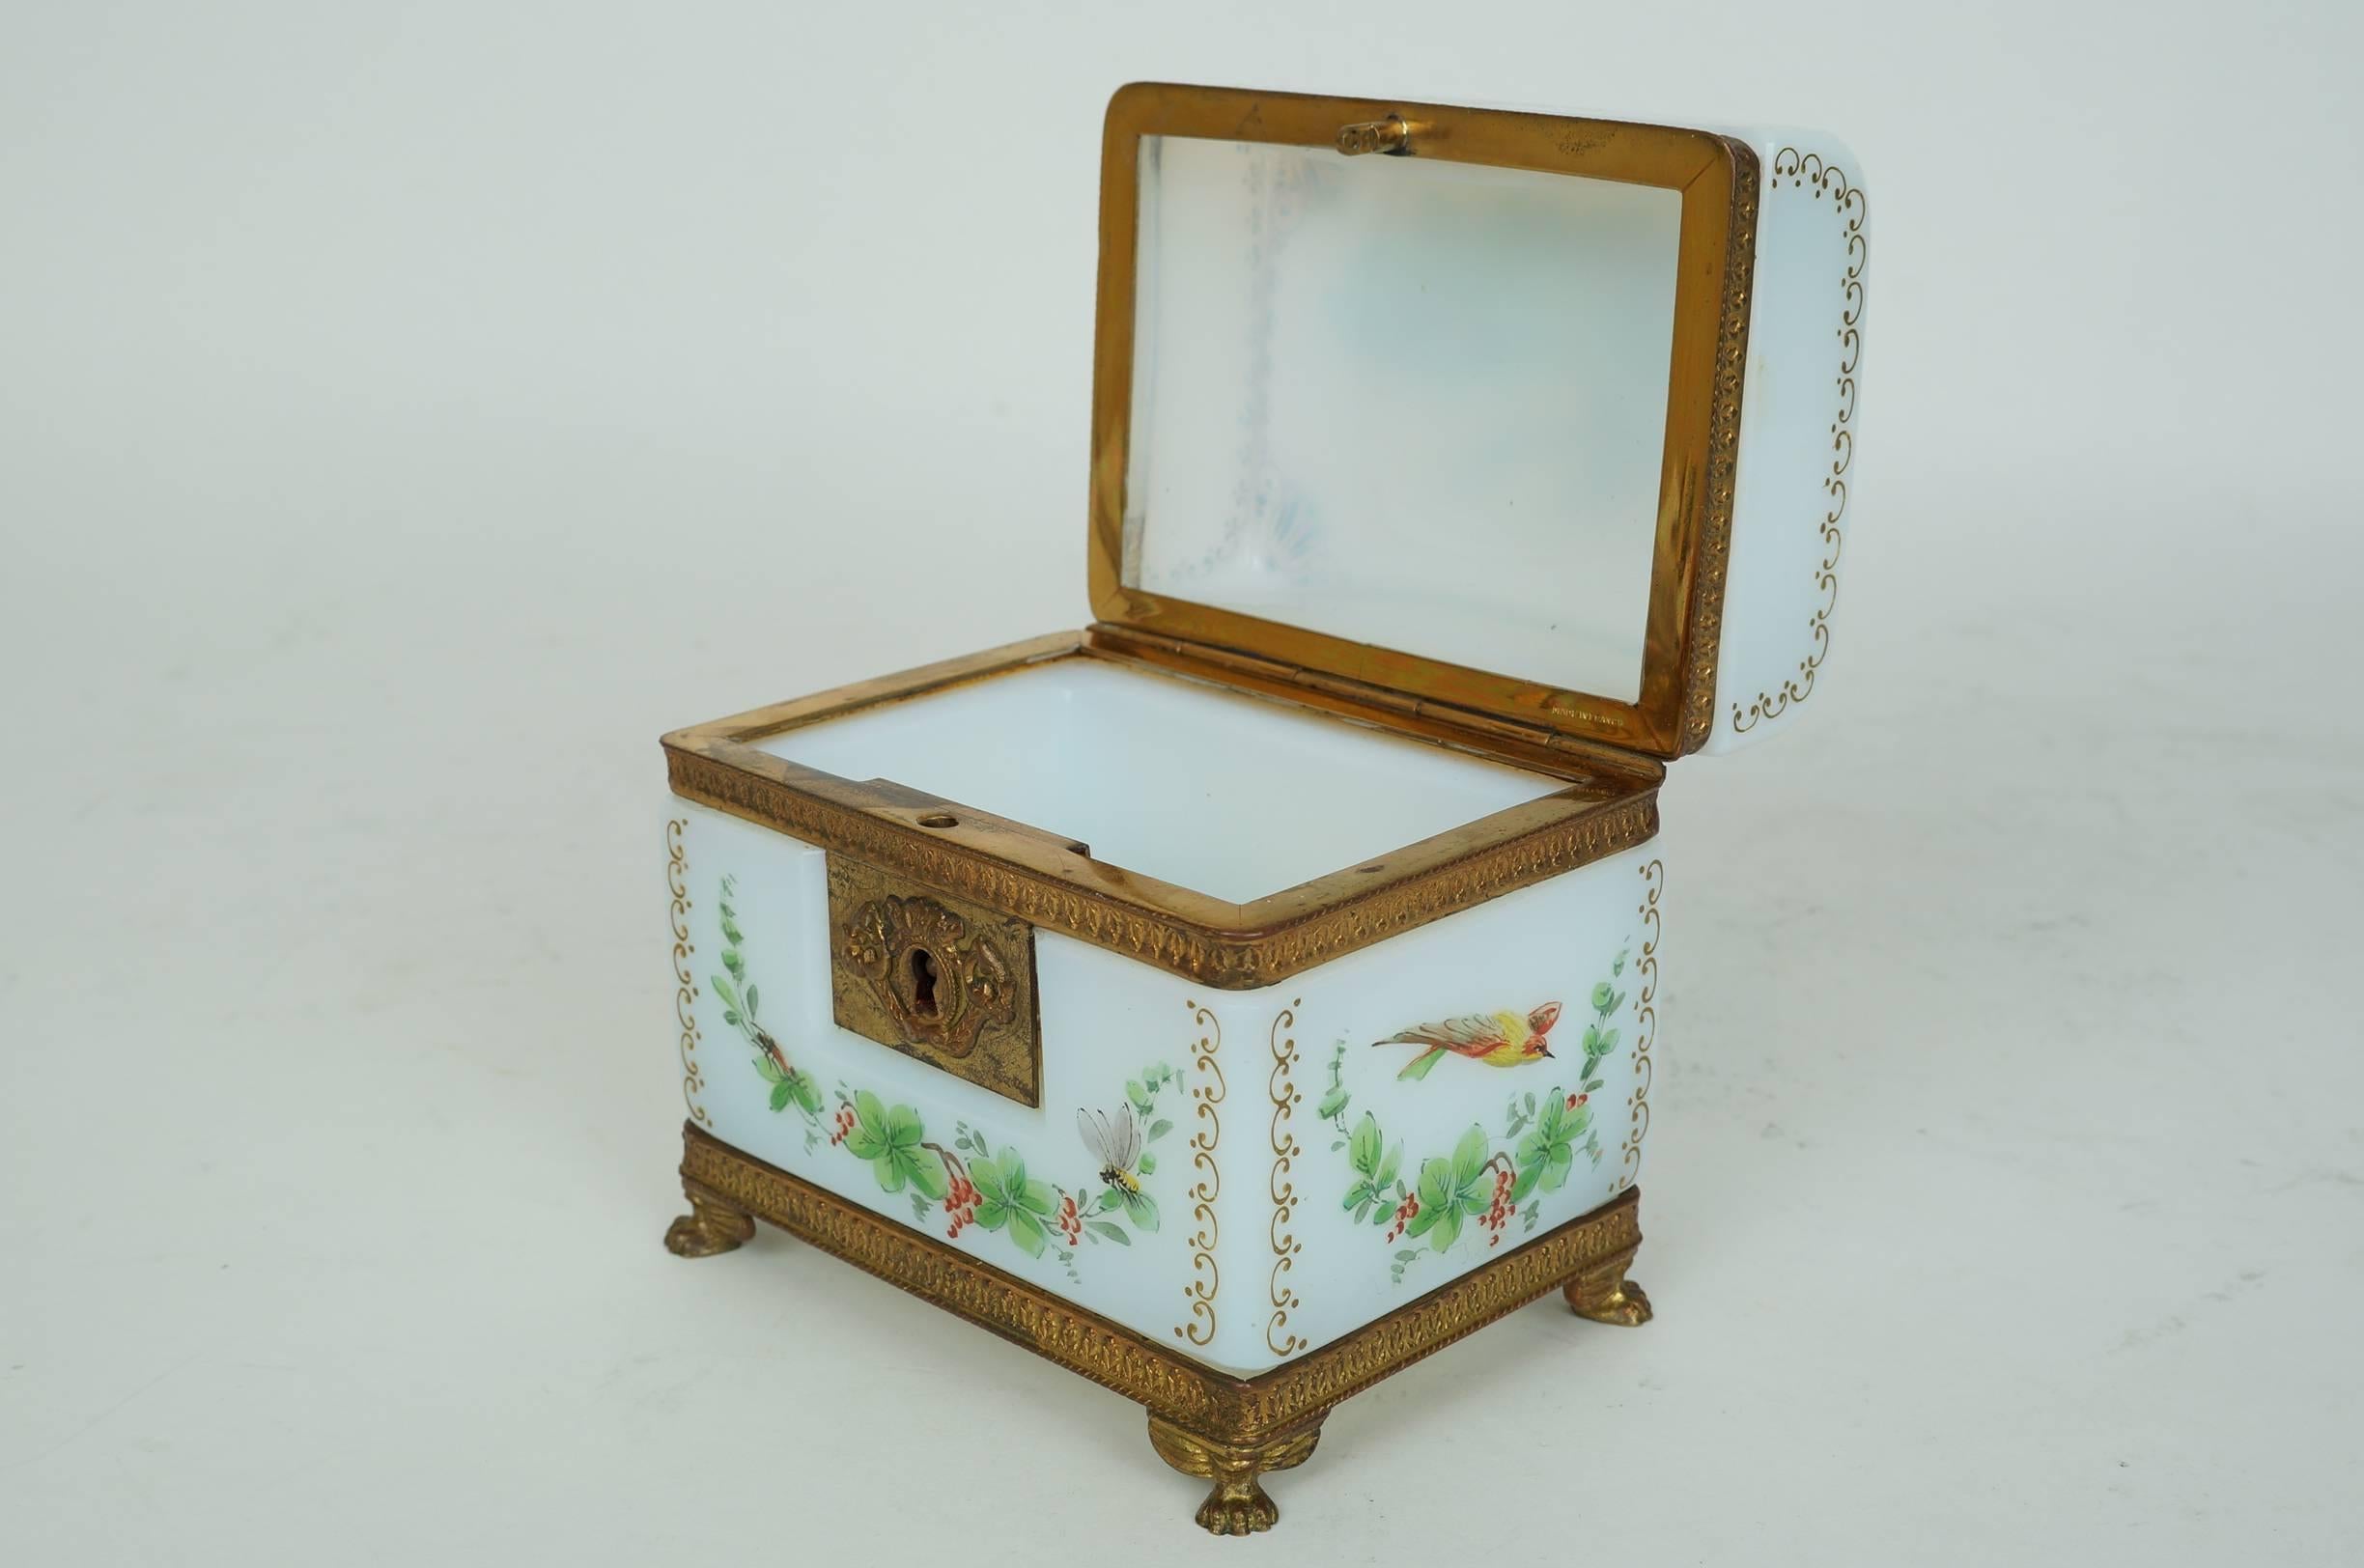 20th Century French White Opaline Jewelry Box with Painted Floral and Bird Decorations